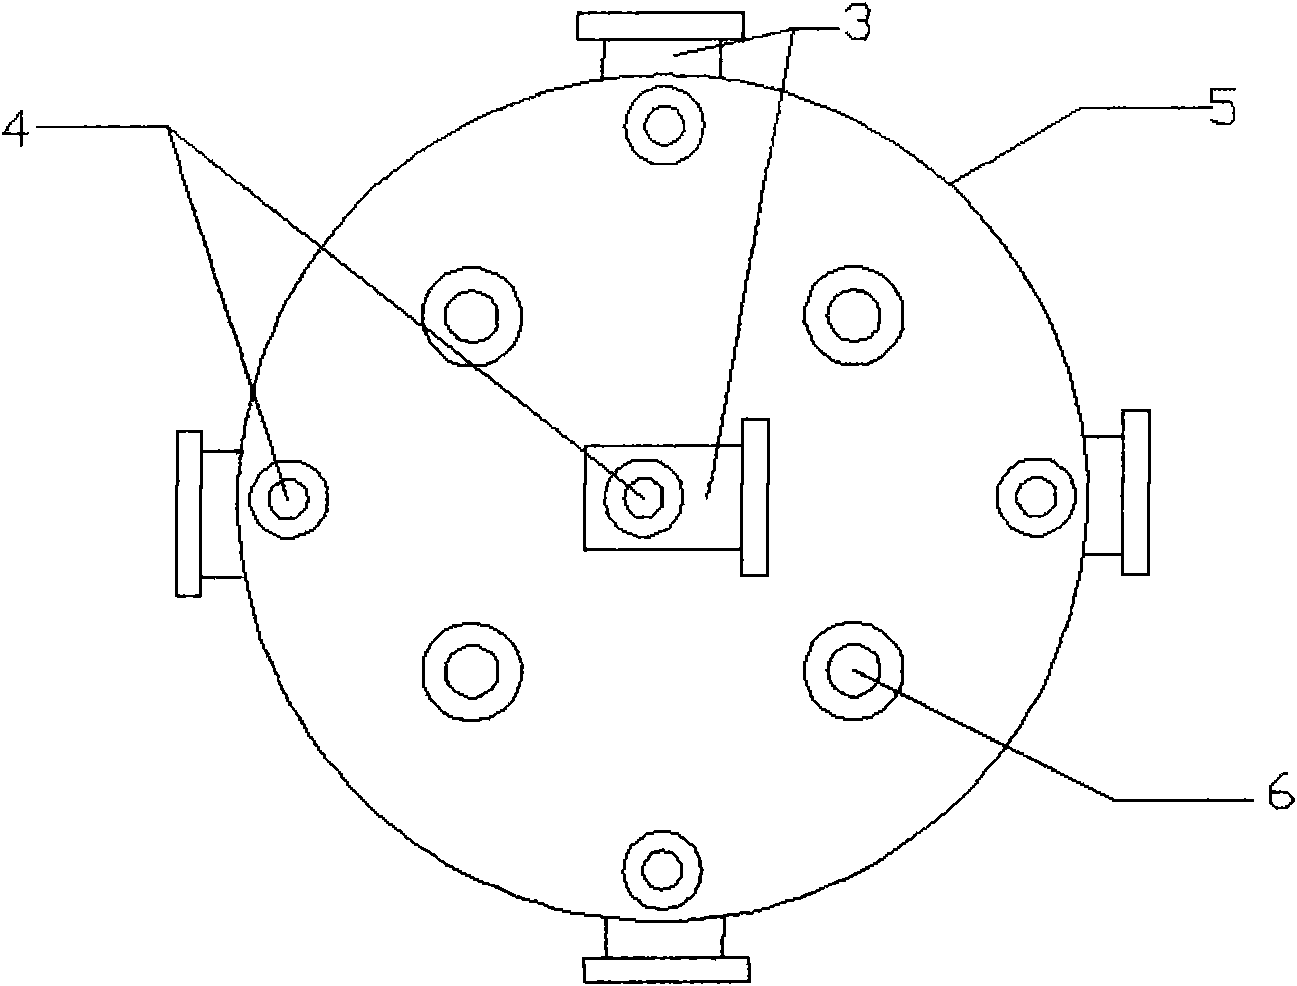 Multi-stage and multi-pipe efficient jet pump